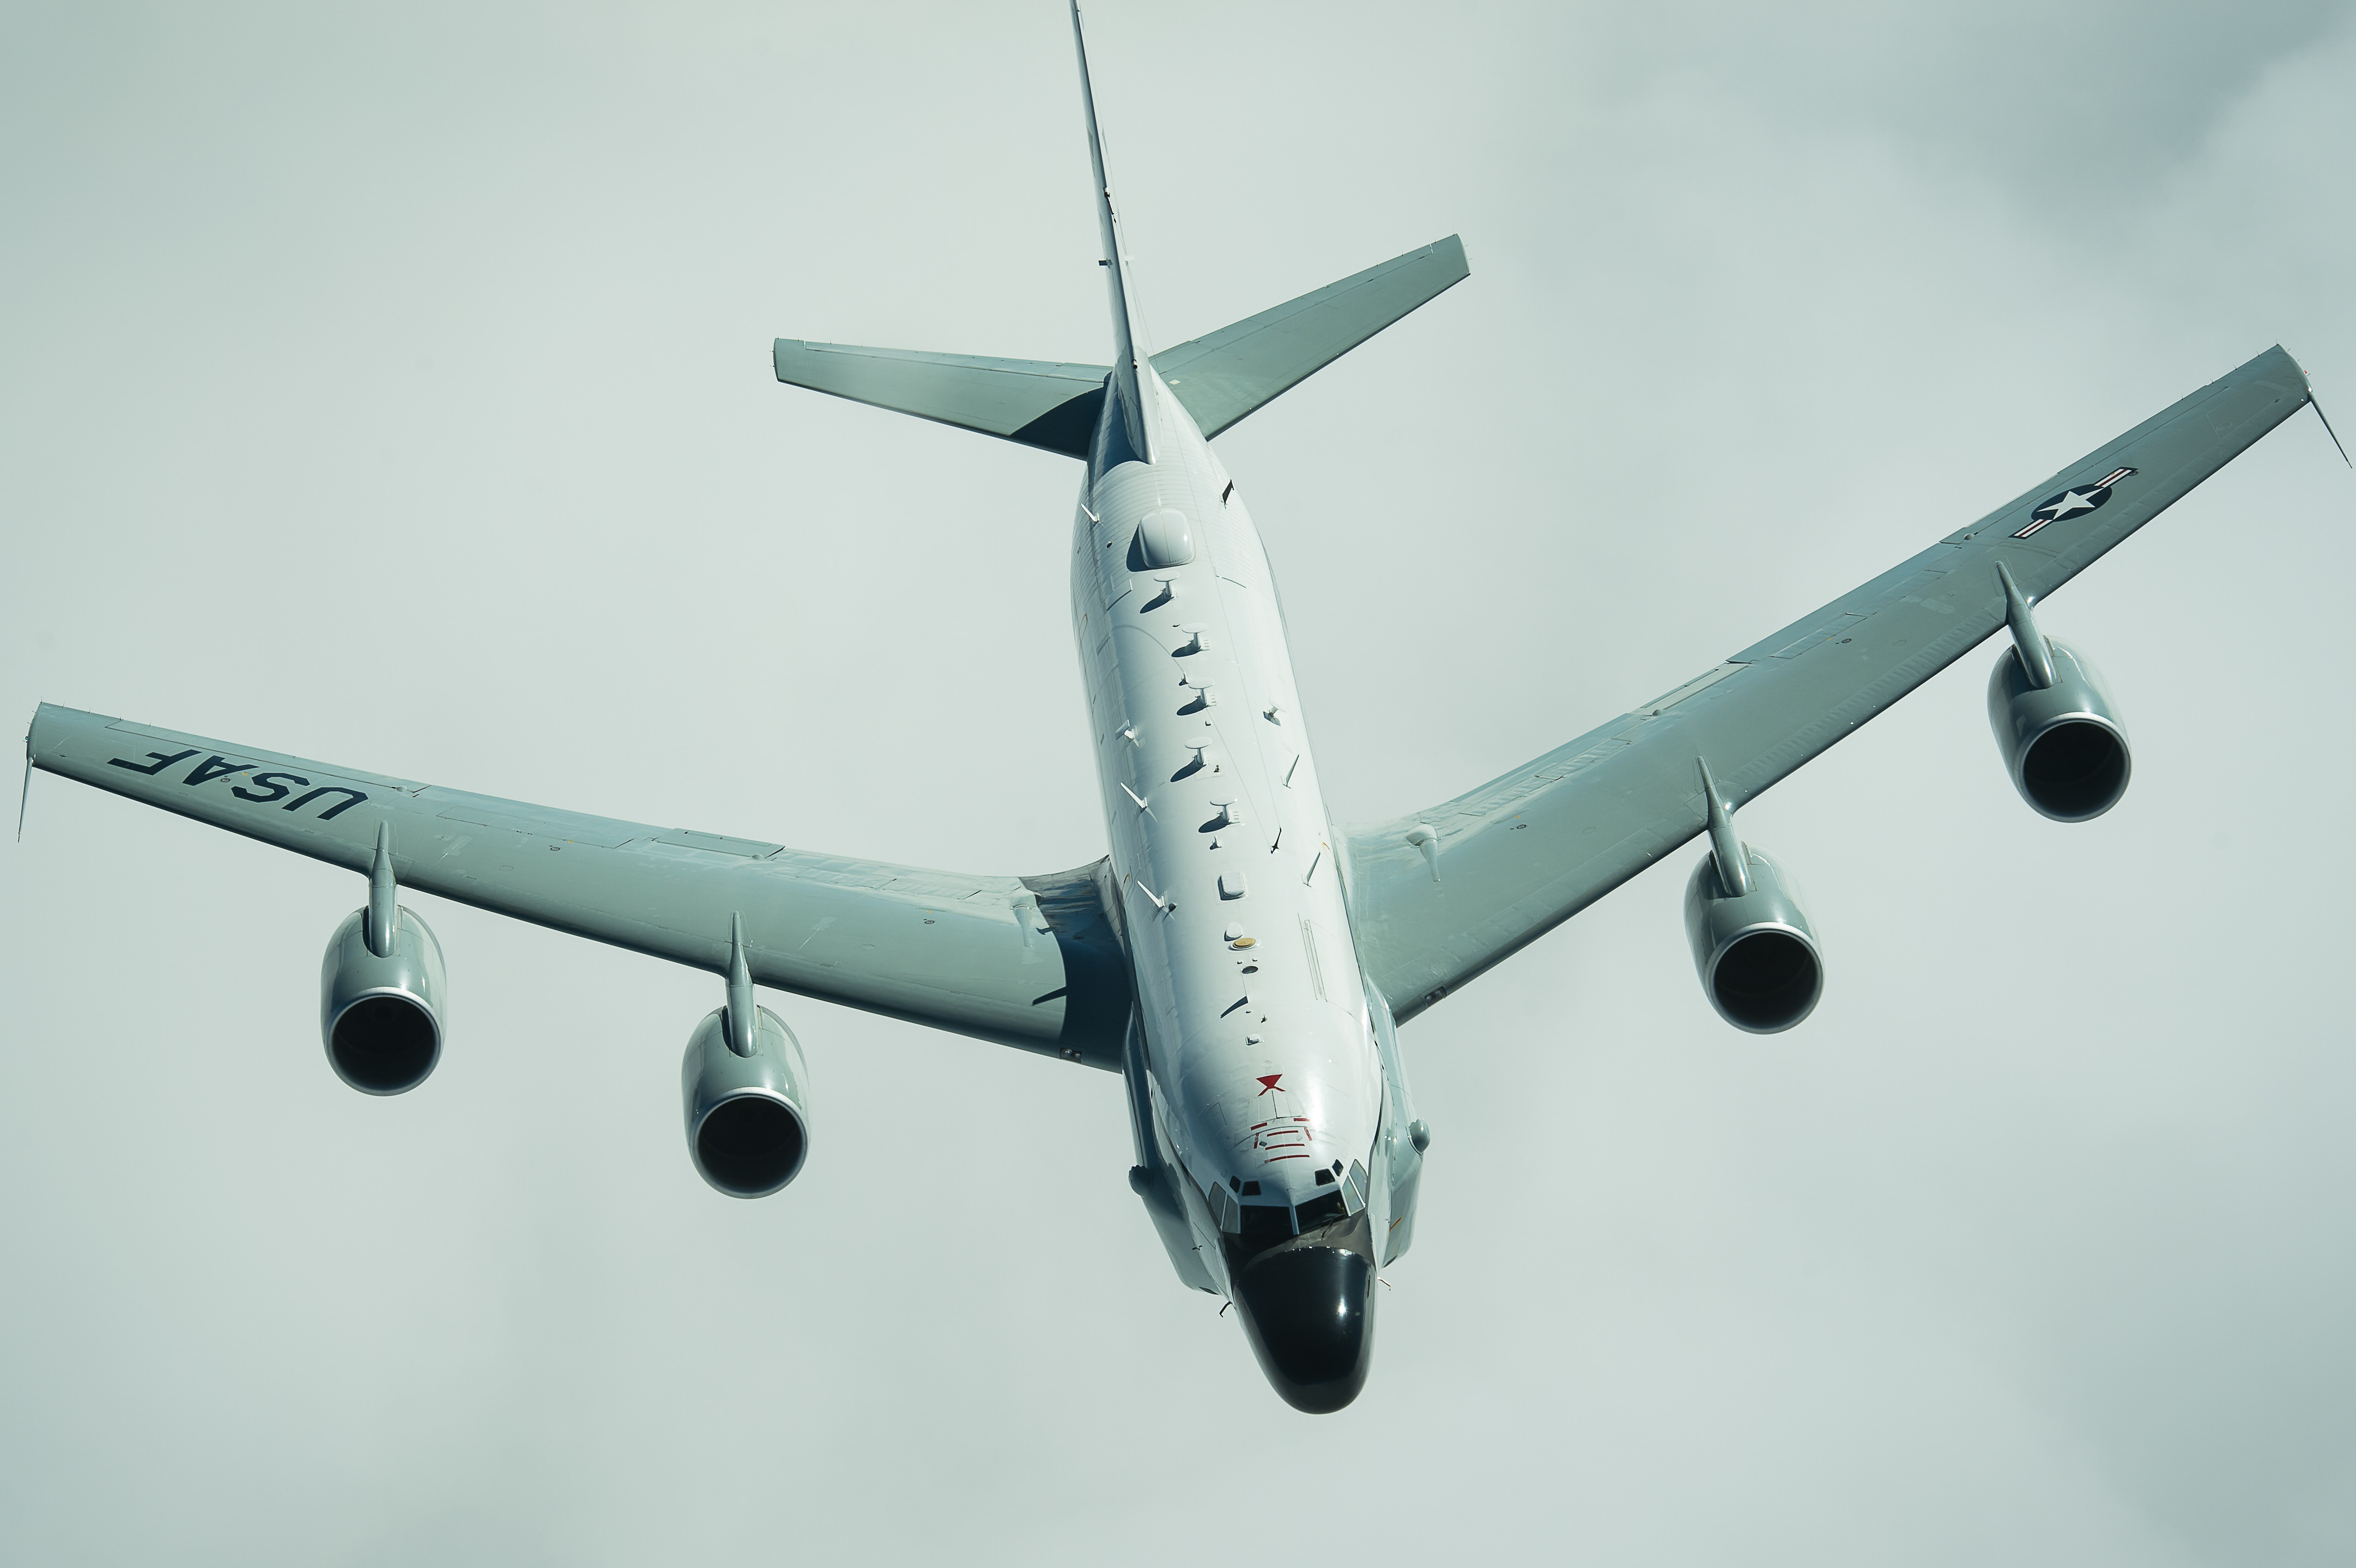 Image shows a Rivet Joint aircraft flying.